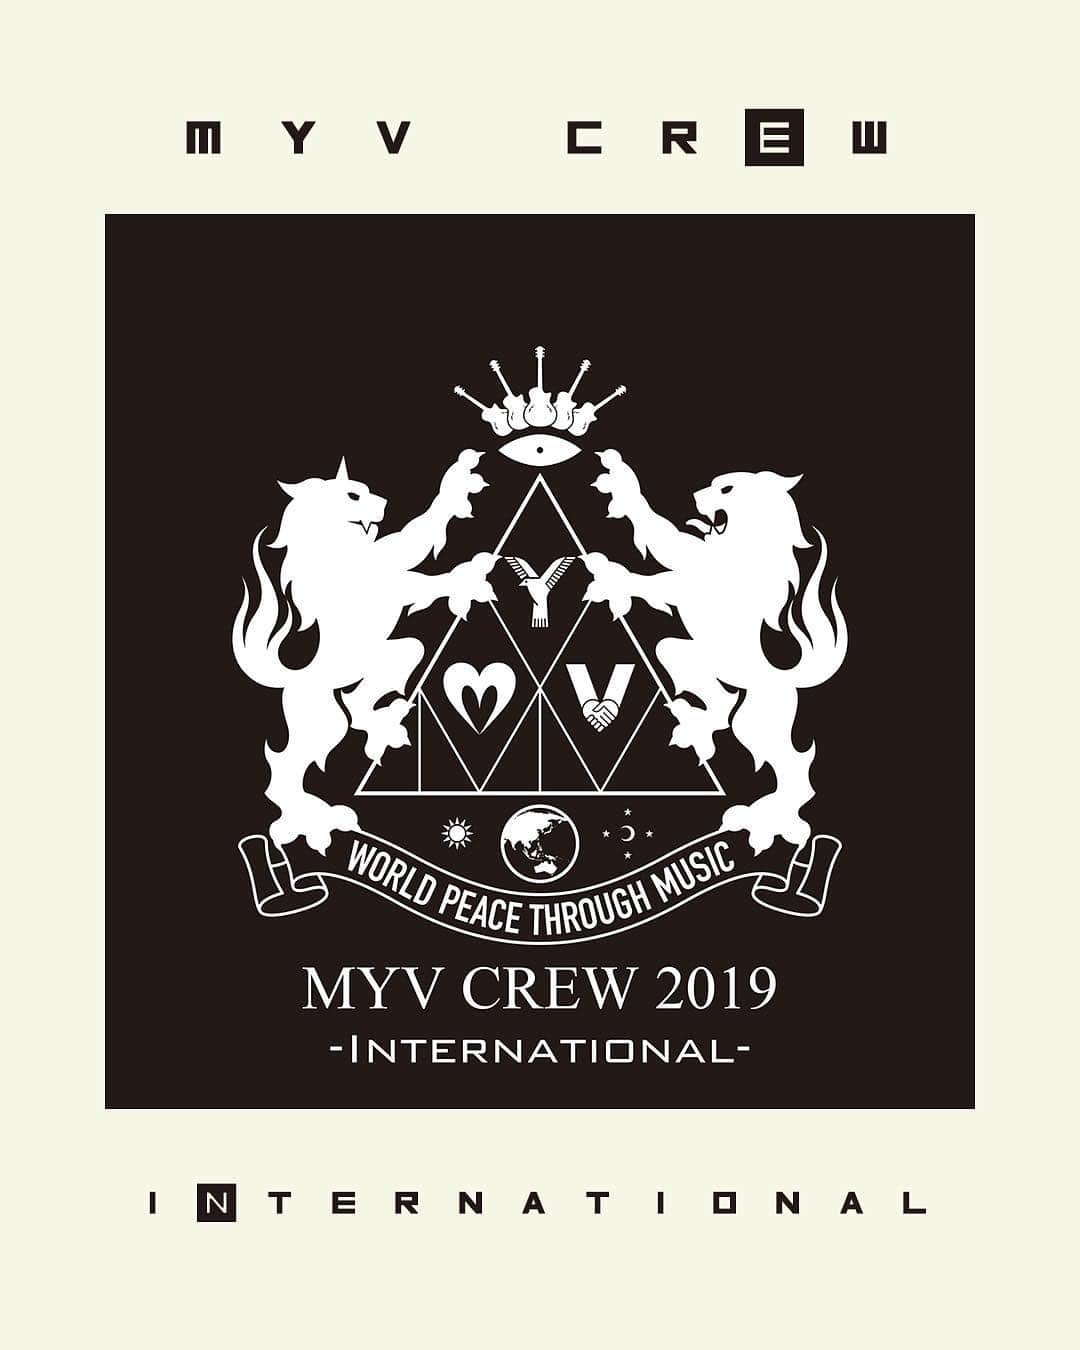 MIYAVI（石原貴雅）さんのインスタグラム写真 - (MIYAVI（石原貴雅）Instagram)「MYV CREW International (outside of Japan) sign-ups will now take place through MIYAVI.COM. To register, copy & paste the appropriate link below into your browser:  New Members https://miyavi.com/collections/all/products/worldwide-miyavi-fan-club-myv-crew-2019-membership  Renewal Members https://miyavi.com/products/copy-of-international-miyavi-fan-club-myv-crew-2019-membership  New Member instructions on how to register:  1. Enter your Date of Birth (Day, Month, Year) 2. Choose your t-shirt size. 3. Click “Add to cart” 4. Click “View Cart” or the cart icon in the top left corner to check-out.  5. Upon checking out, your mailing address will be stored in our records for shipping purposes.  Once your payment has been processed, you will receive a confirmation email with your MYV CREW MEMBER ID# and additional instructions on how to join the MYV Crew on Twitter.  Renewal Members instructions on how to renew:  1. Enter your existing Member ID# 2. Re-enter your Date of Birth (day, Month, Year) 3. Choose your t-shirt size 4. Click “Add to cart” 5. Click “View Cart” or the cart icon in the top left corner to check-out.  6. Upon checking out, your mailing address will be stored in our records for shipping purposes.  For those that have already renewed and would like to use your existing ID#, we will contact you.  If you have any other issues with your order, please contact our support team at support+MIYAVI@manheadmerch.com」4月6日 5時35分 - miyavi_staff